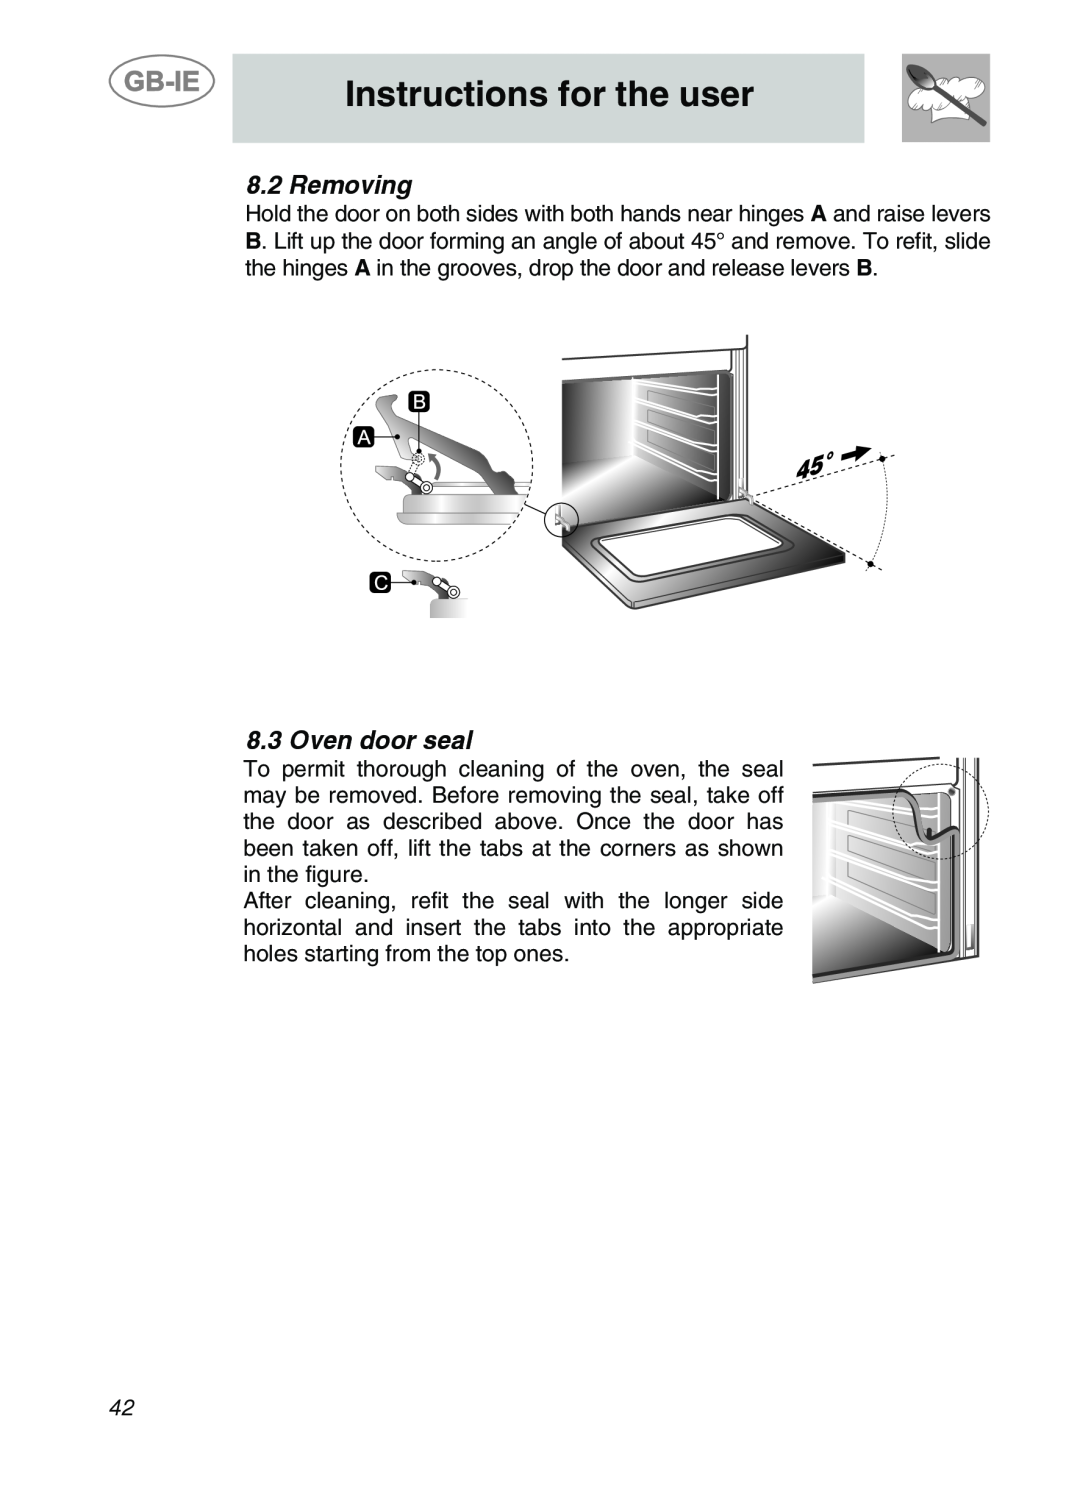 Smeg 9FBYON manual Removing, Oven door seal, Instructions for the user 